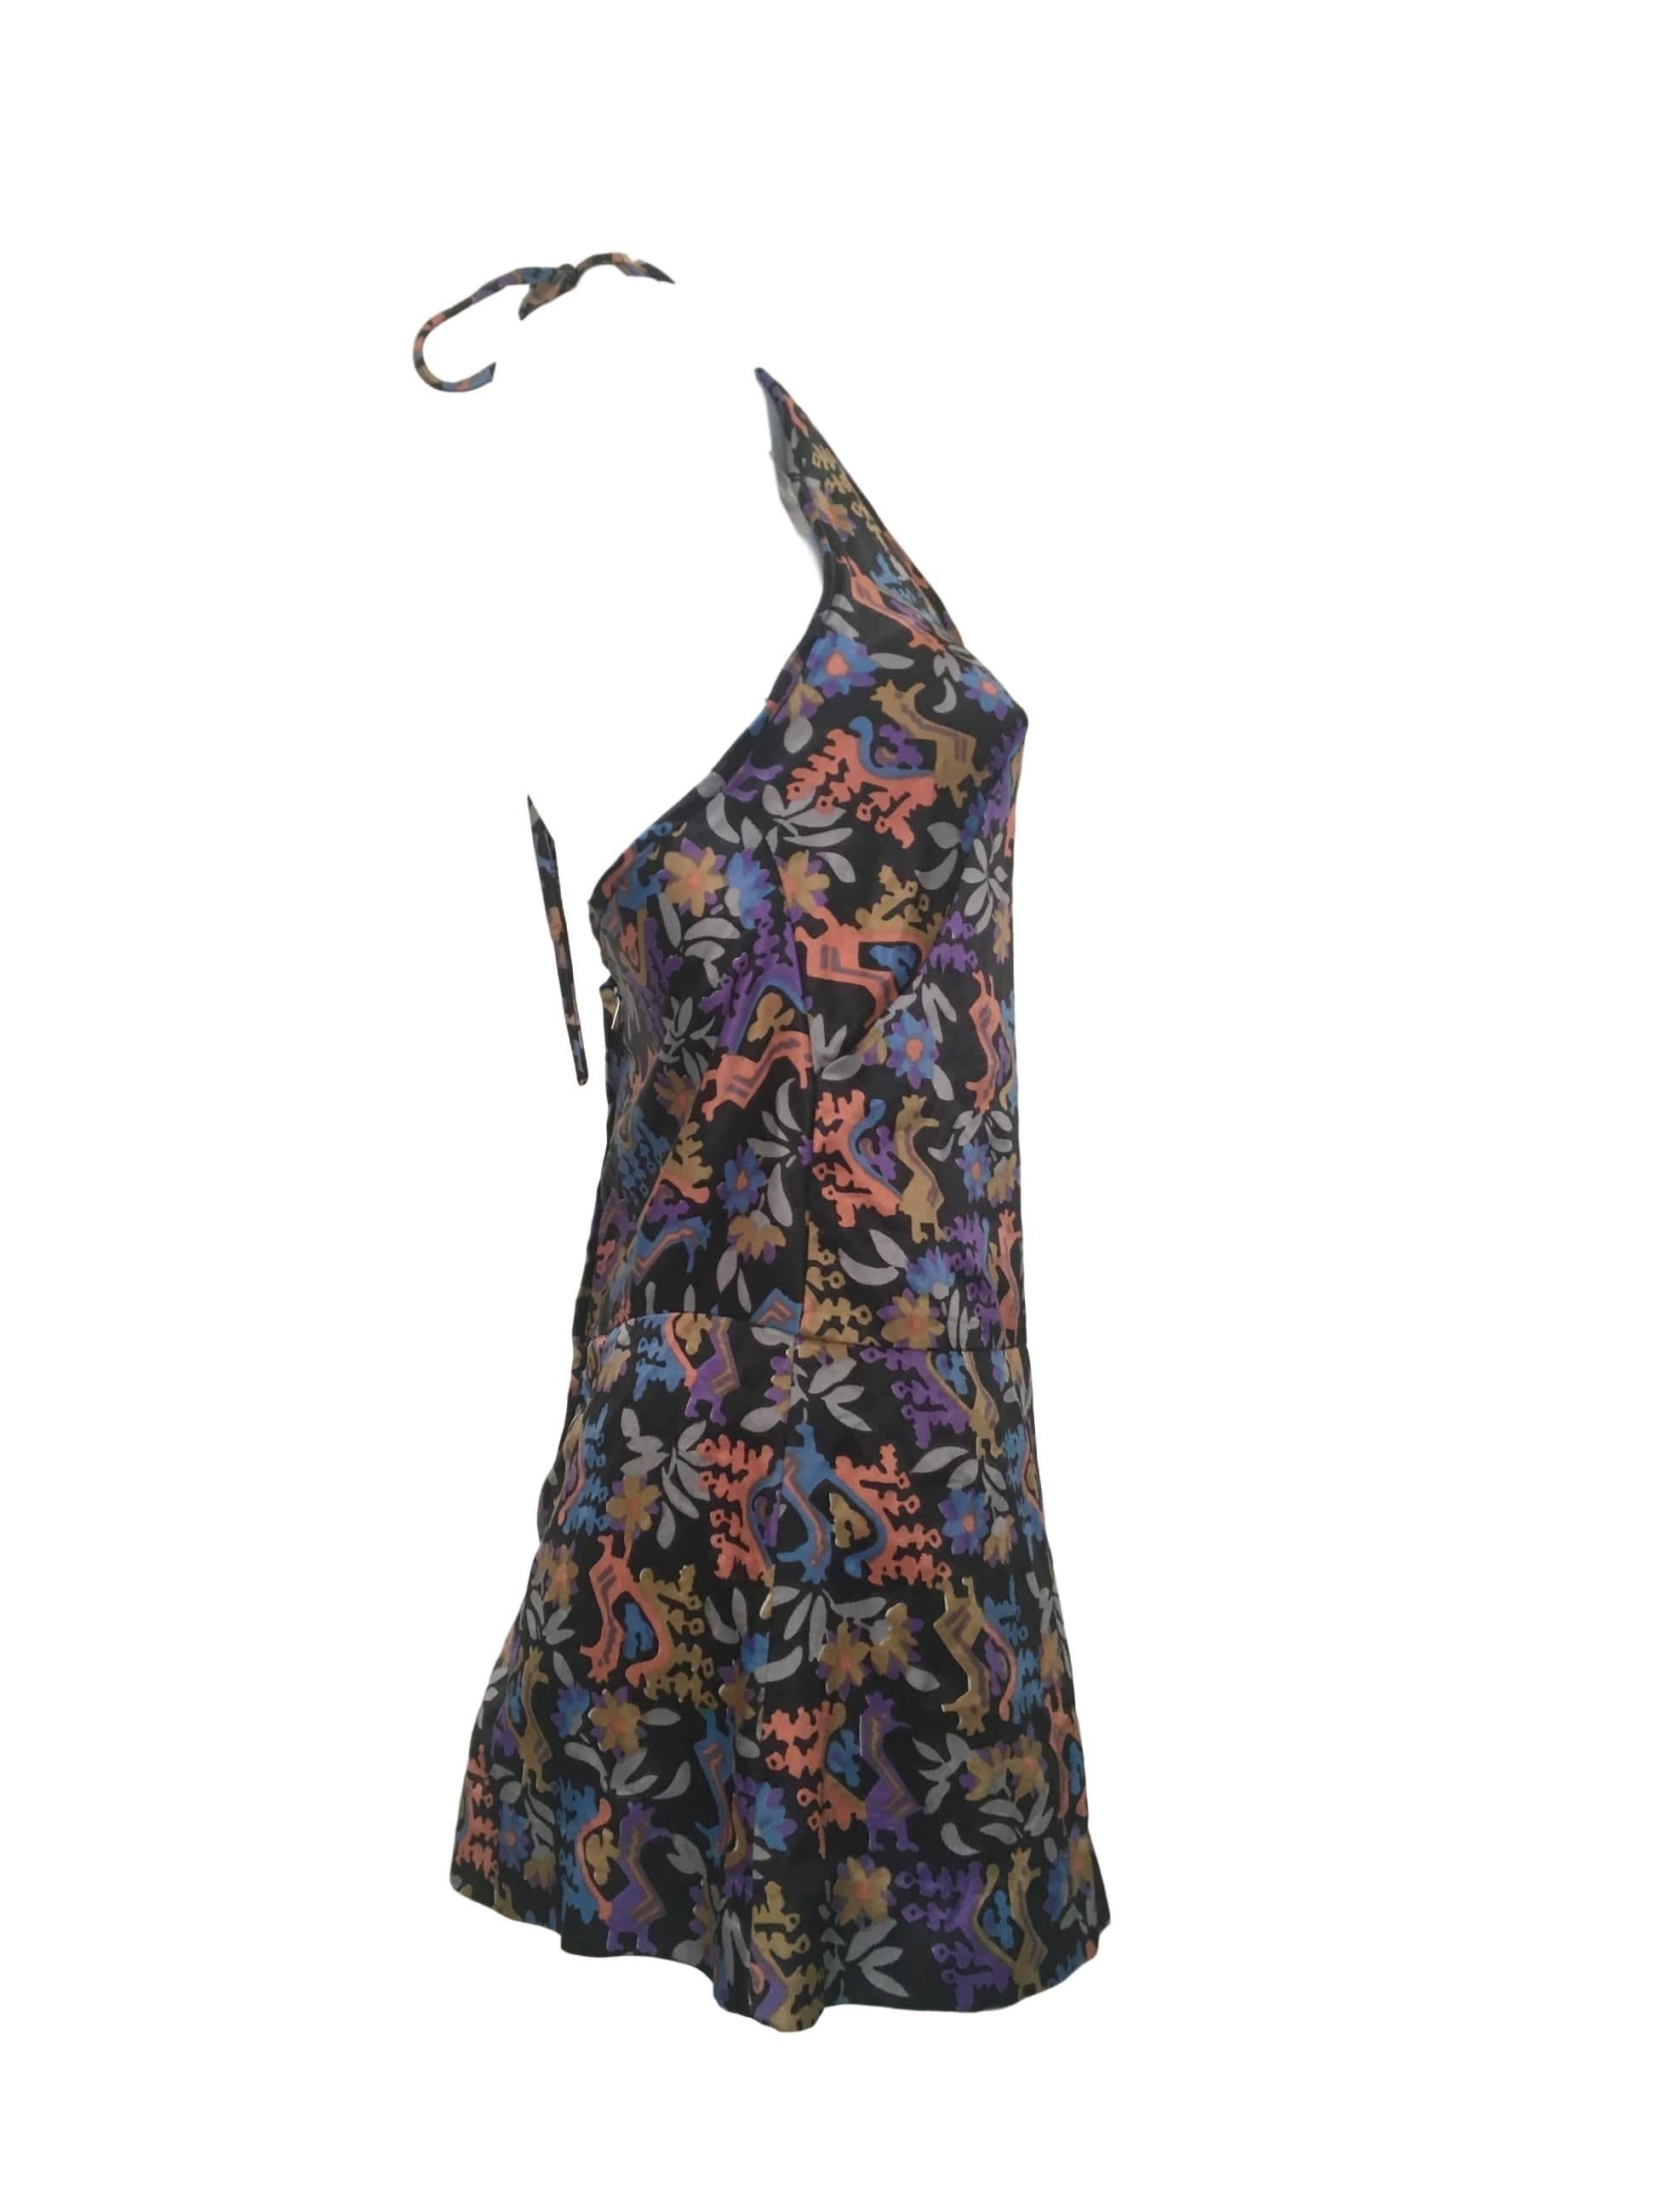 Vintage satin halter neck romper/playsuit by Clobber (Jeff Banks) With mythical print and back zip fastening.

Size UK 8/10. Measuring 16 inches across bust 14 inches across waist and 38 inches length

In excellent condition.

Available worldwide,